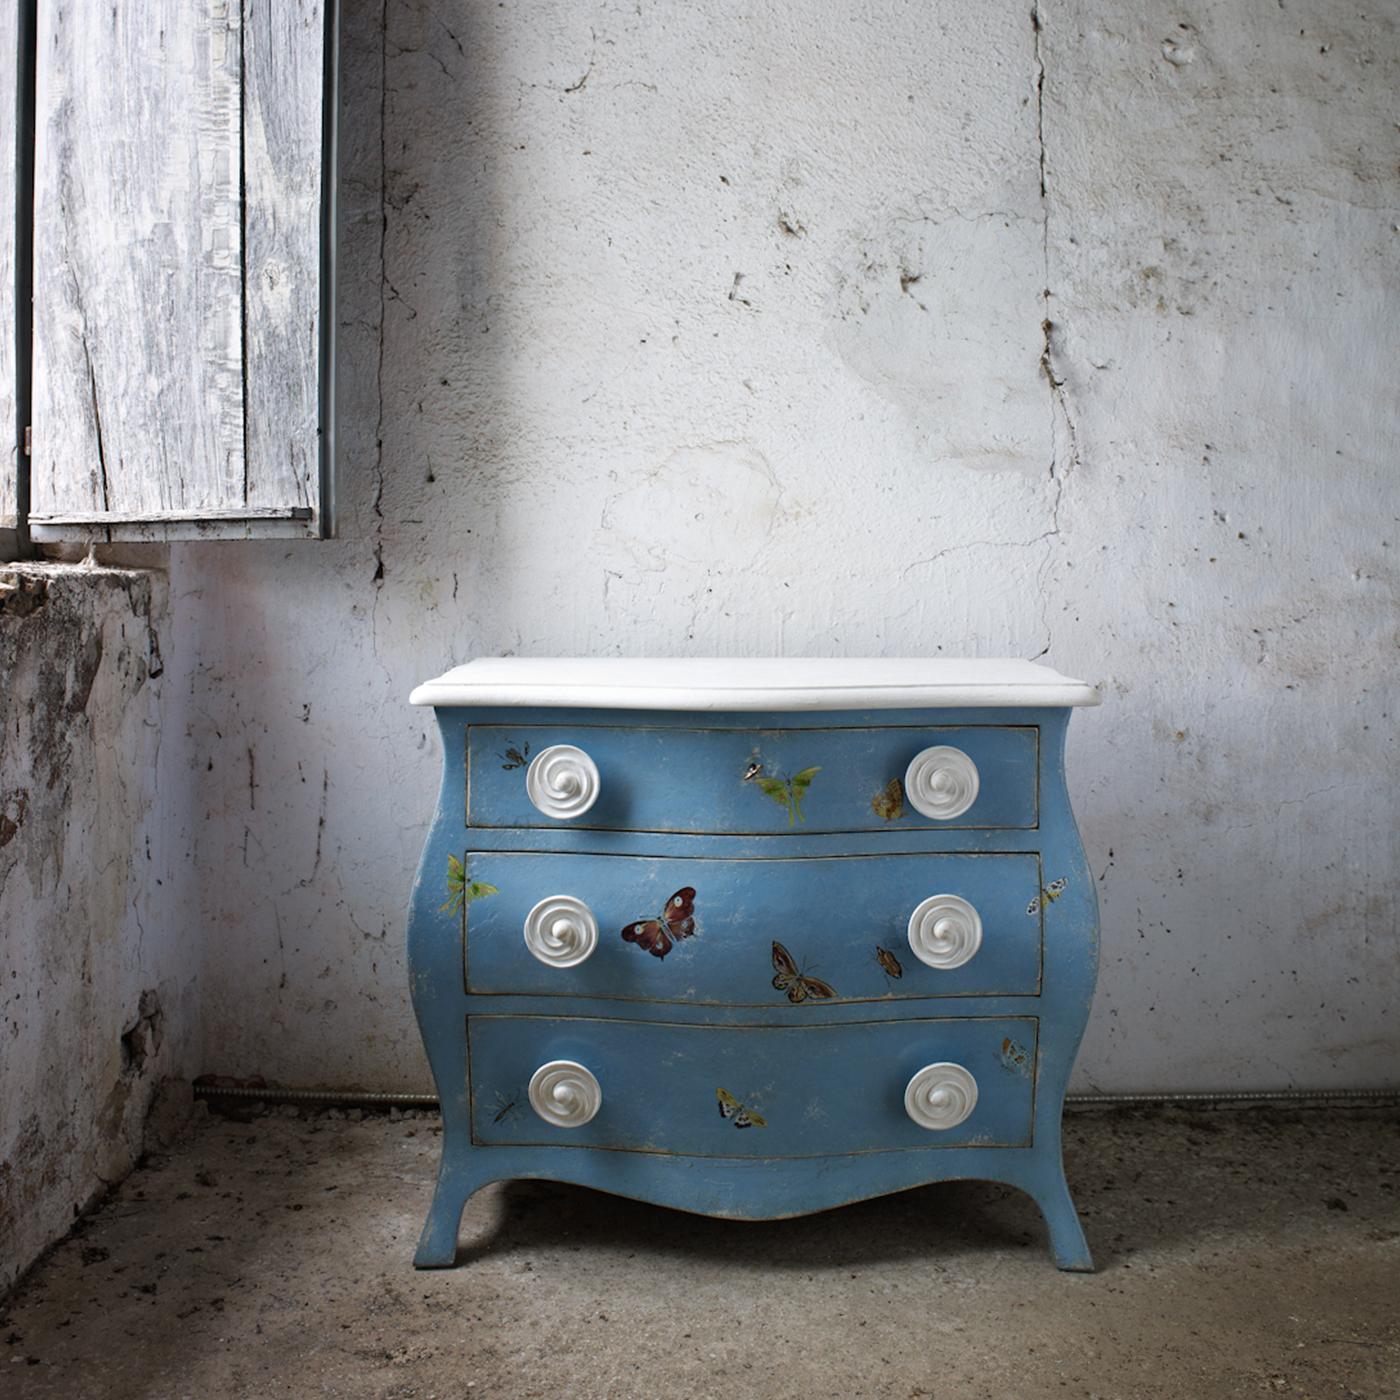 Introducing the Asolo chest in Parma blue, a hand-painted masterpiece adorned with charming butterfly motifs. Its elegant curves and soothing color create a warm and inviting ambiance. Customizable in size and design. Please, ask the Concierge